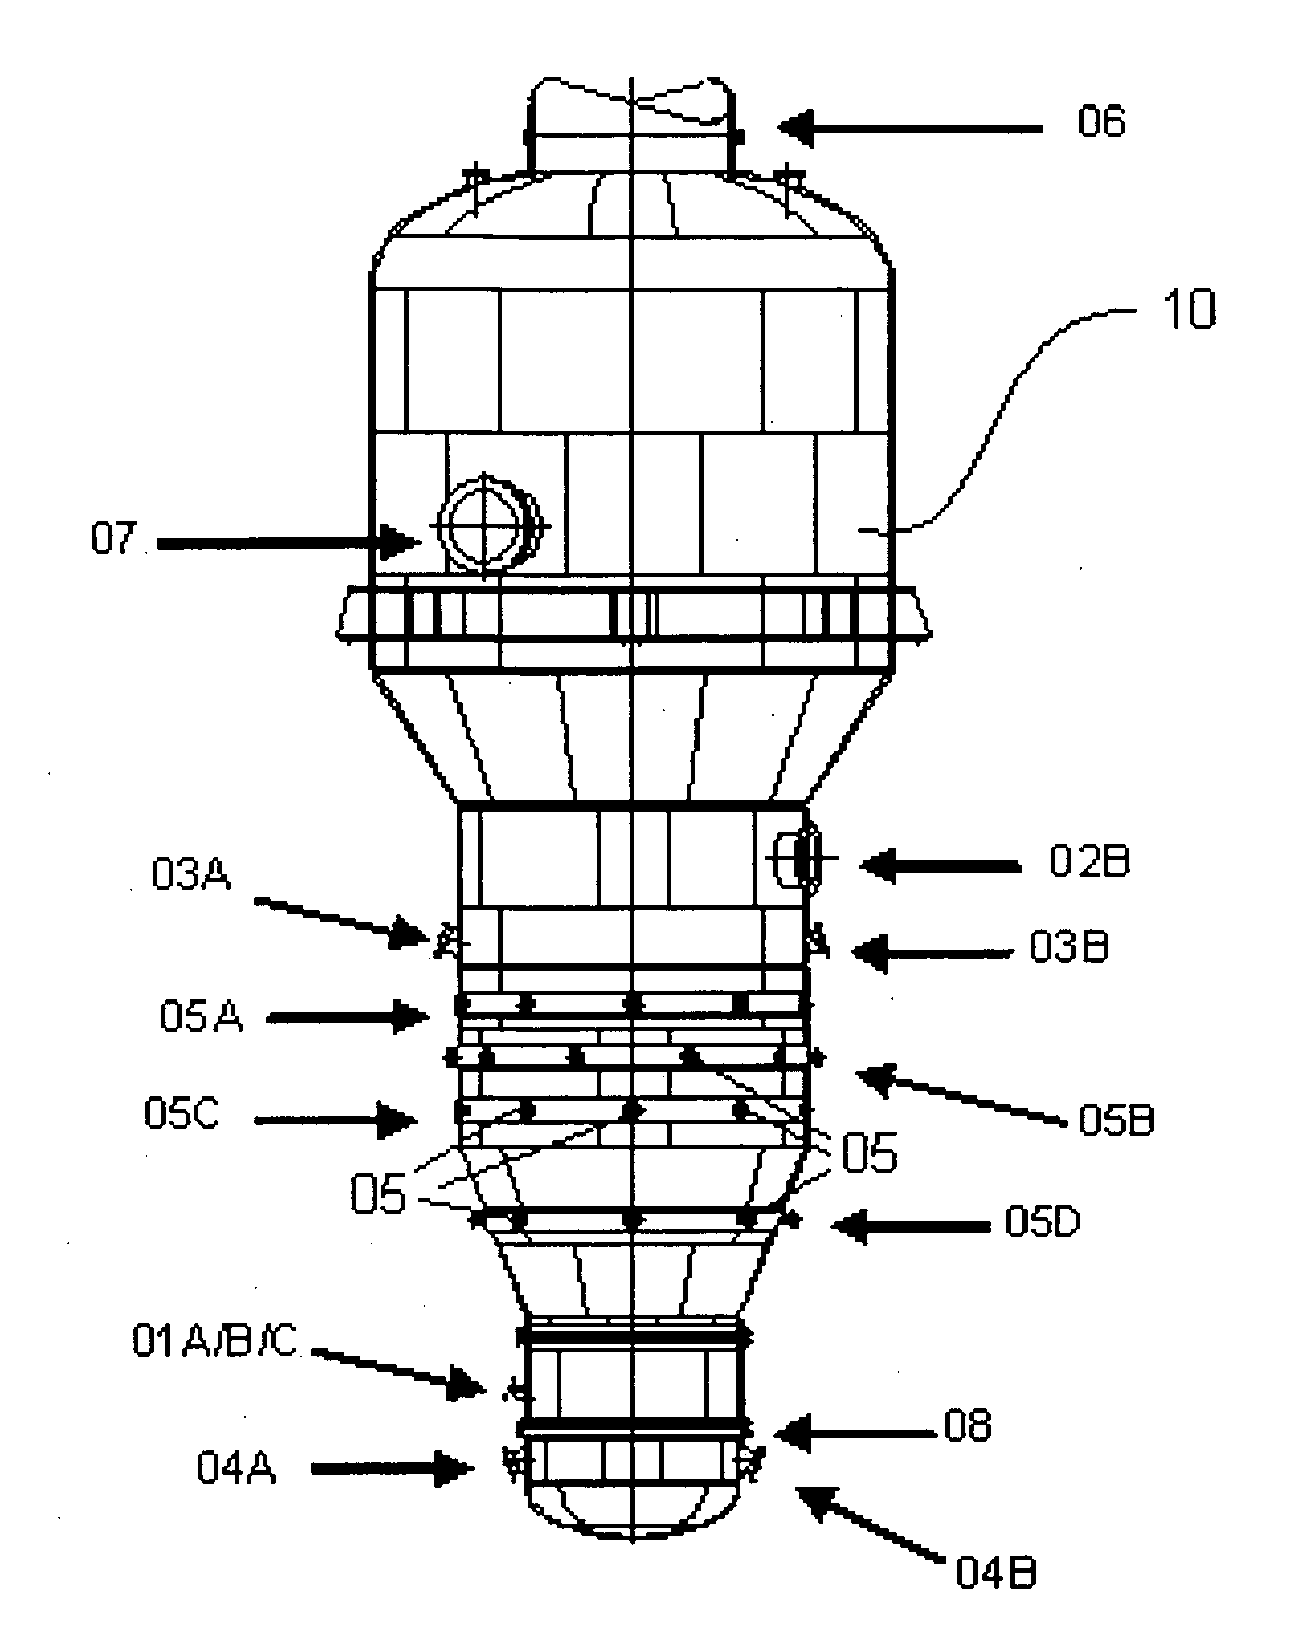 Thermal gasification reactor for producing heat energy from waste